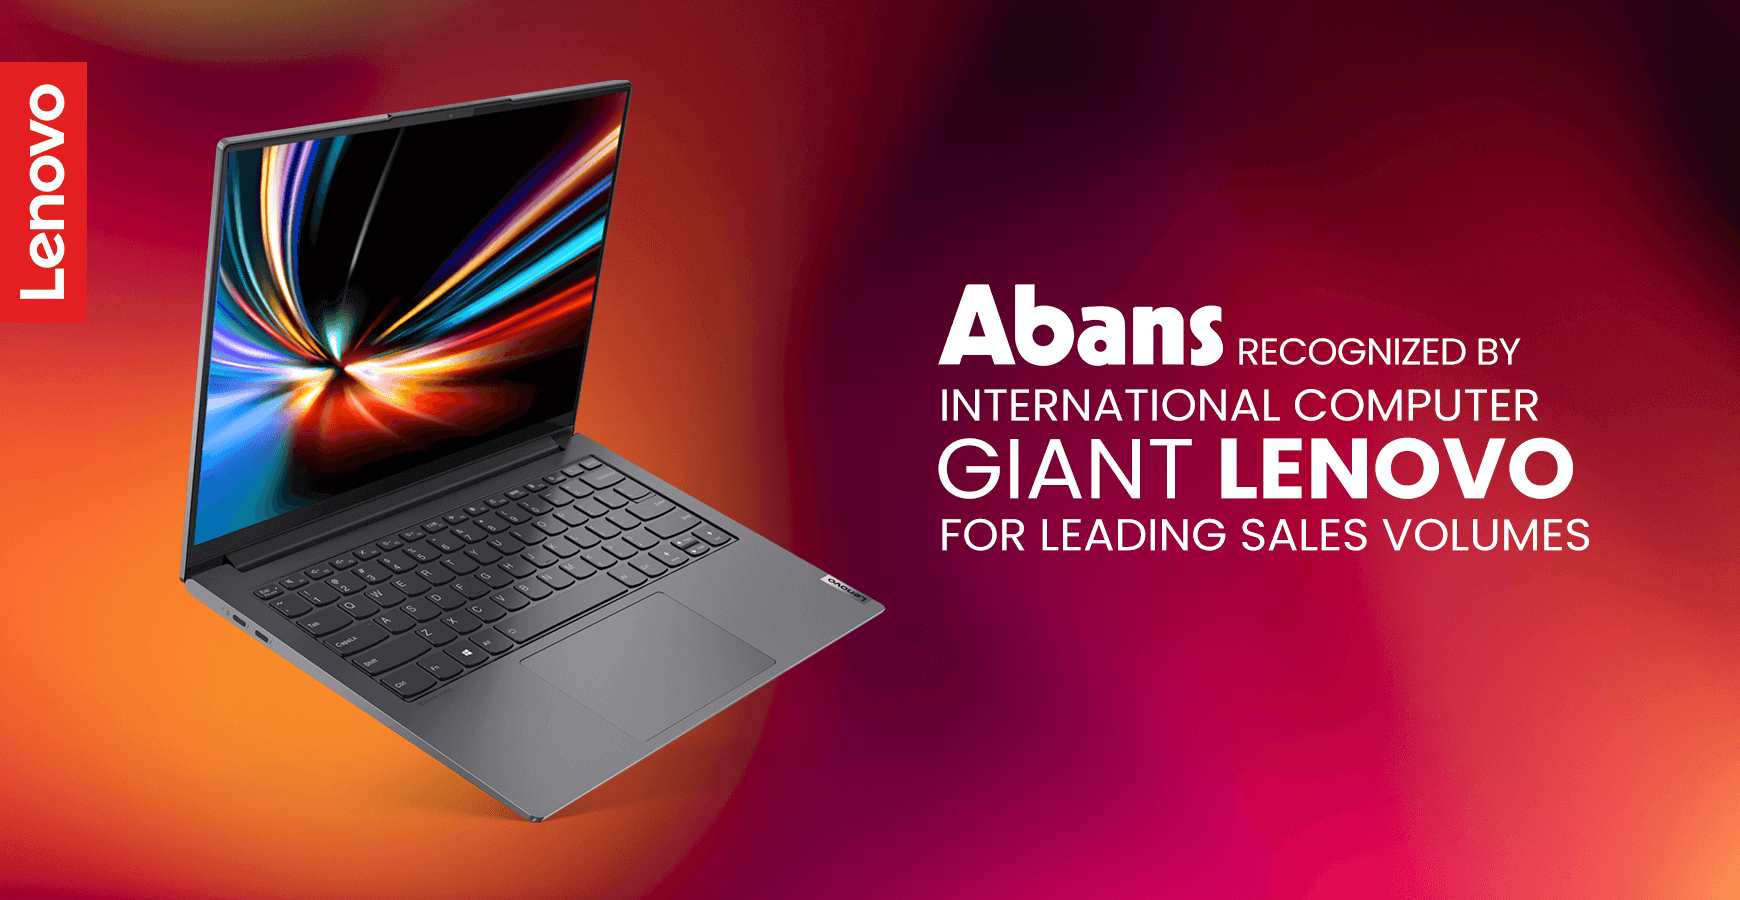 ABANS RECOGNIZED BY INTERNATIONAL COMPUTER GIANT LENOVO FOR LEADING SALES VOLUMES